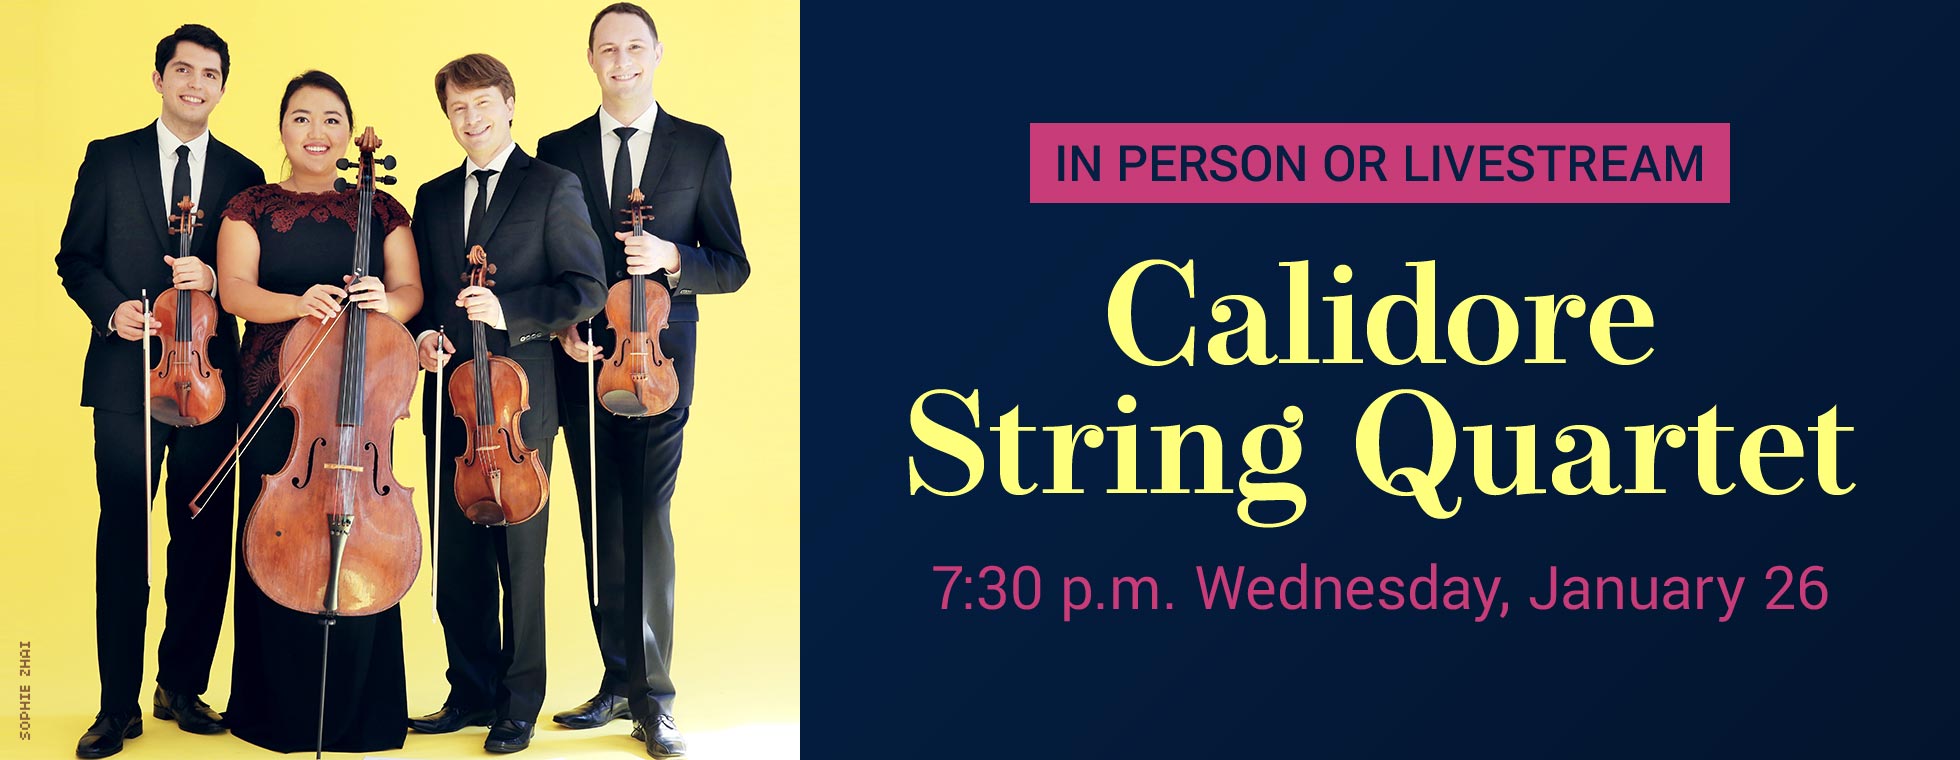 Calidore String Quartet 7:30 p.m. Wednesday, January 26. In person or livestream.